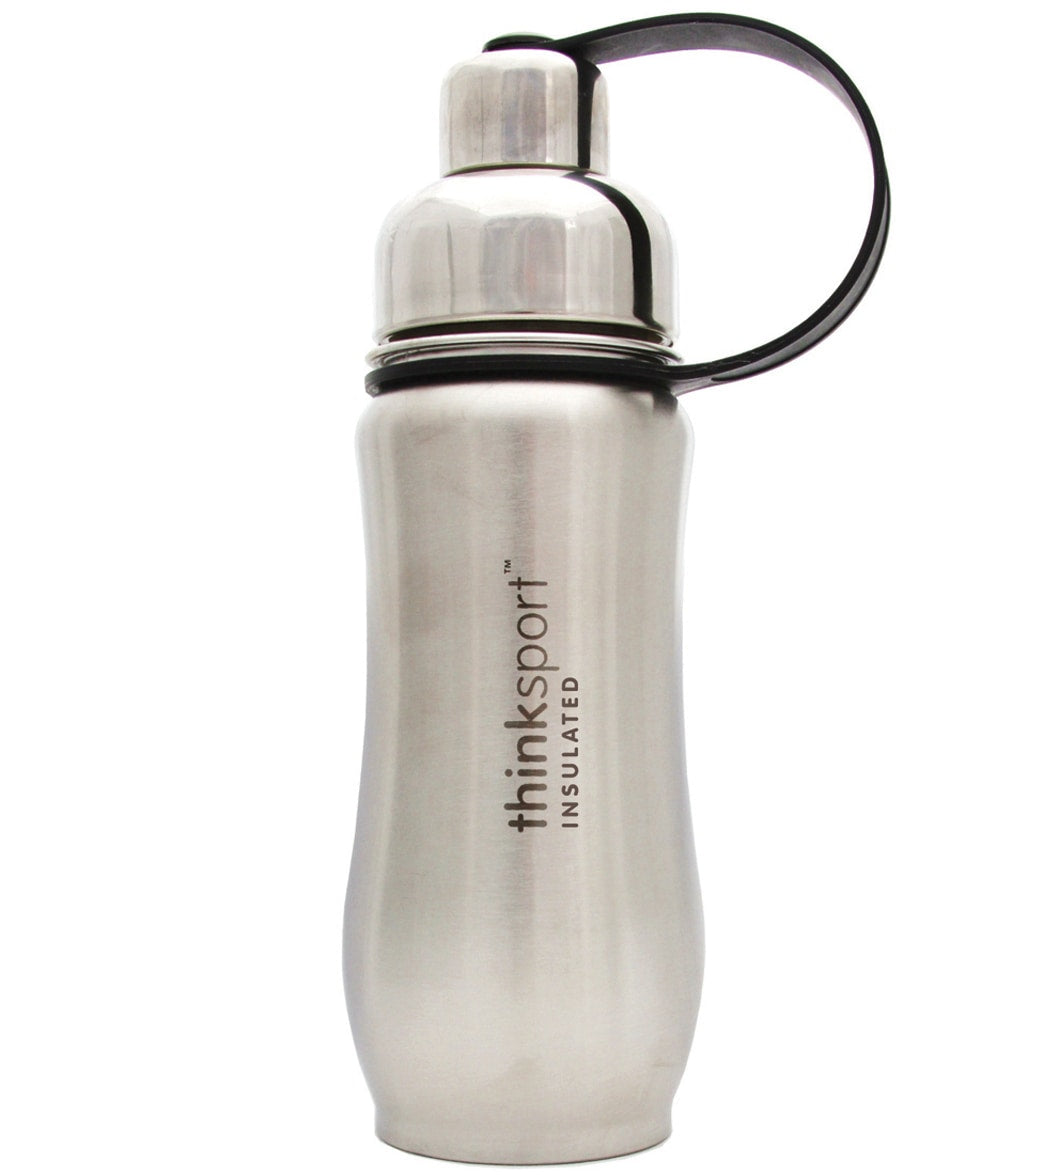 Thinksport Insulated Sports Bottle - 17oz (500ml) - Natural Silver